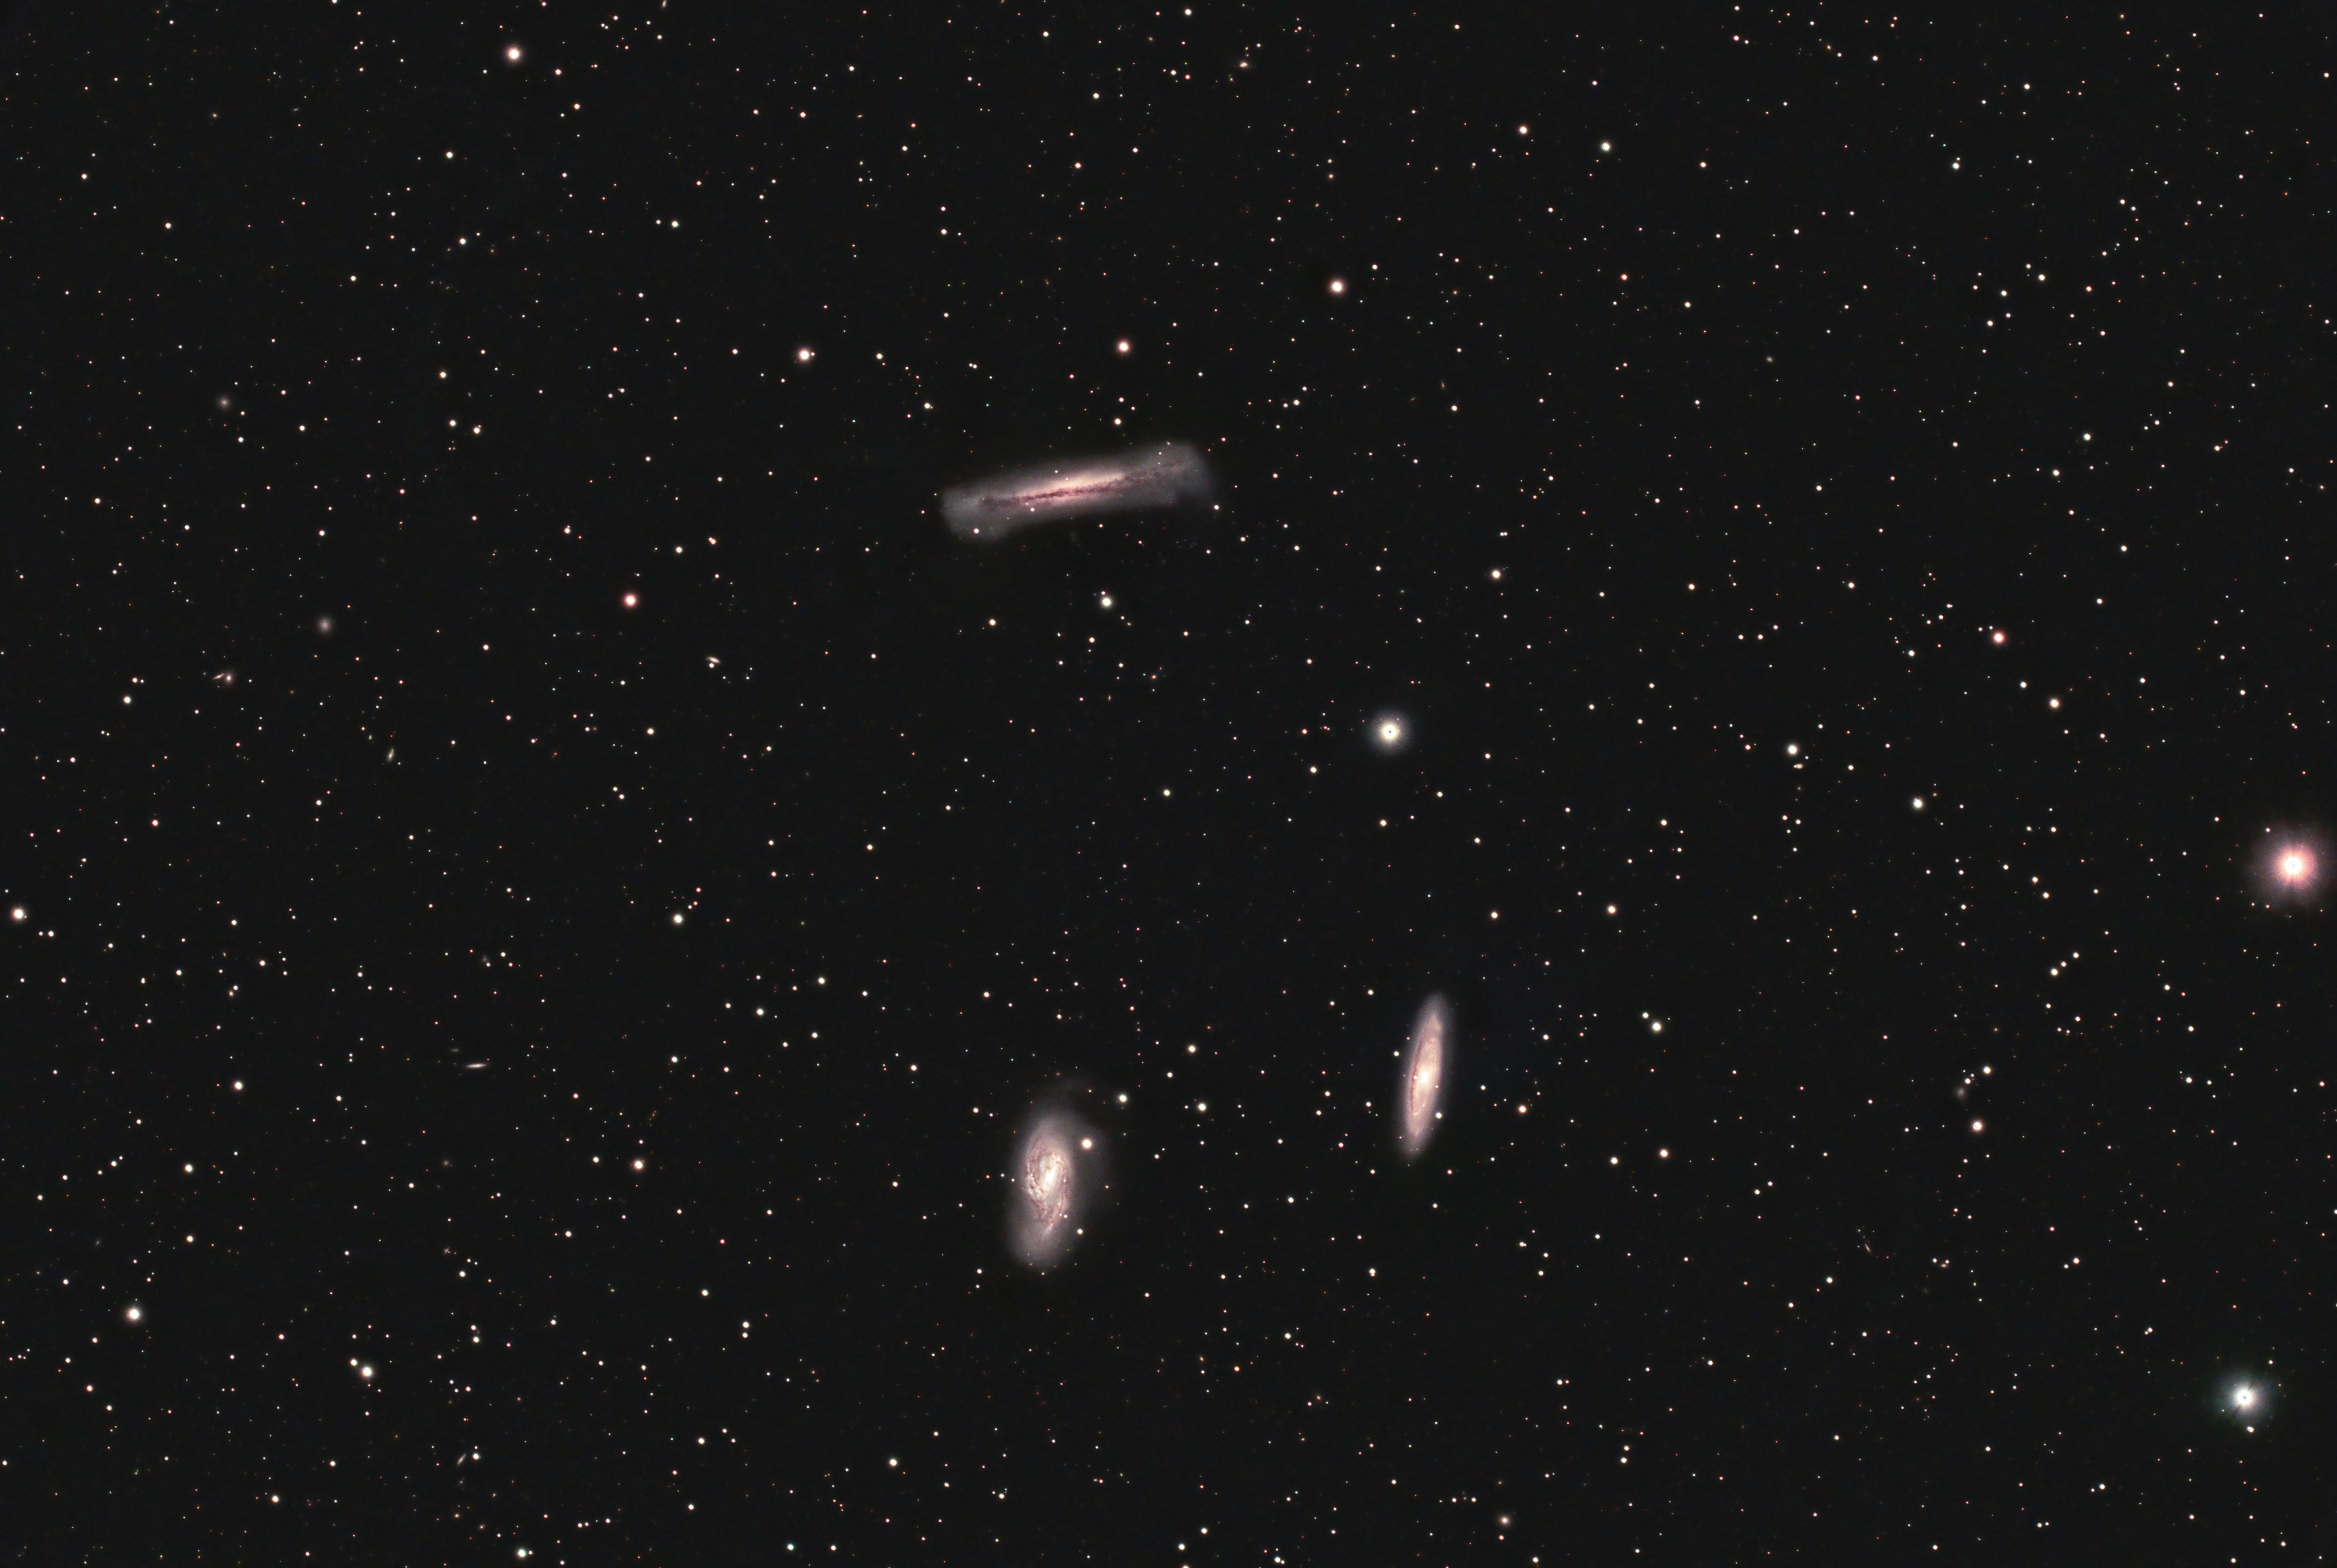 The Leo Triplet comprises NGC 3628 (top) and M66 and M65 (bottom, left and right respectively). This image was captured with a ZWO ASI294MC Pro on a Takahashi FSQ-106N over 13 hours and 35 minutes of exposure. 